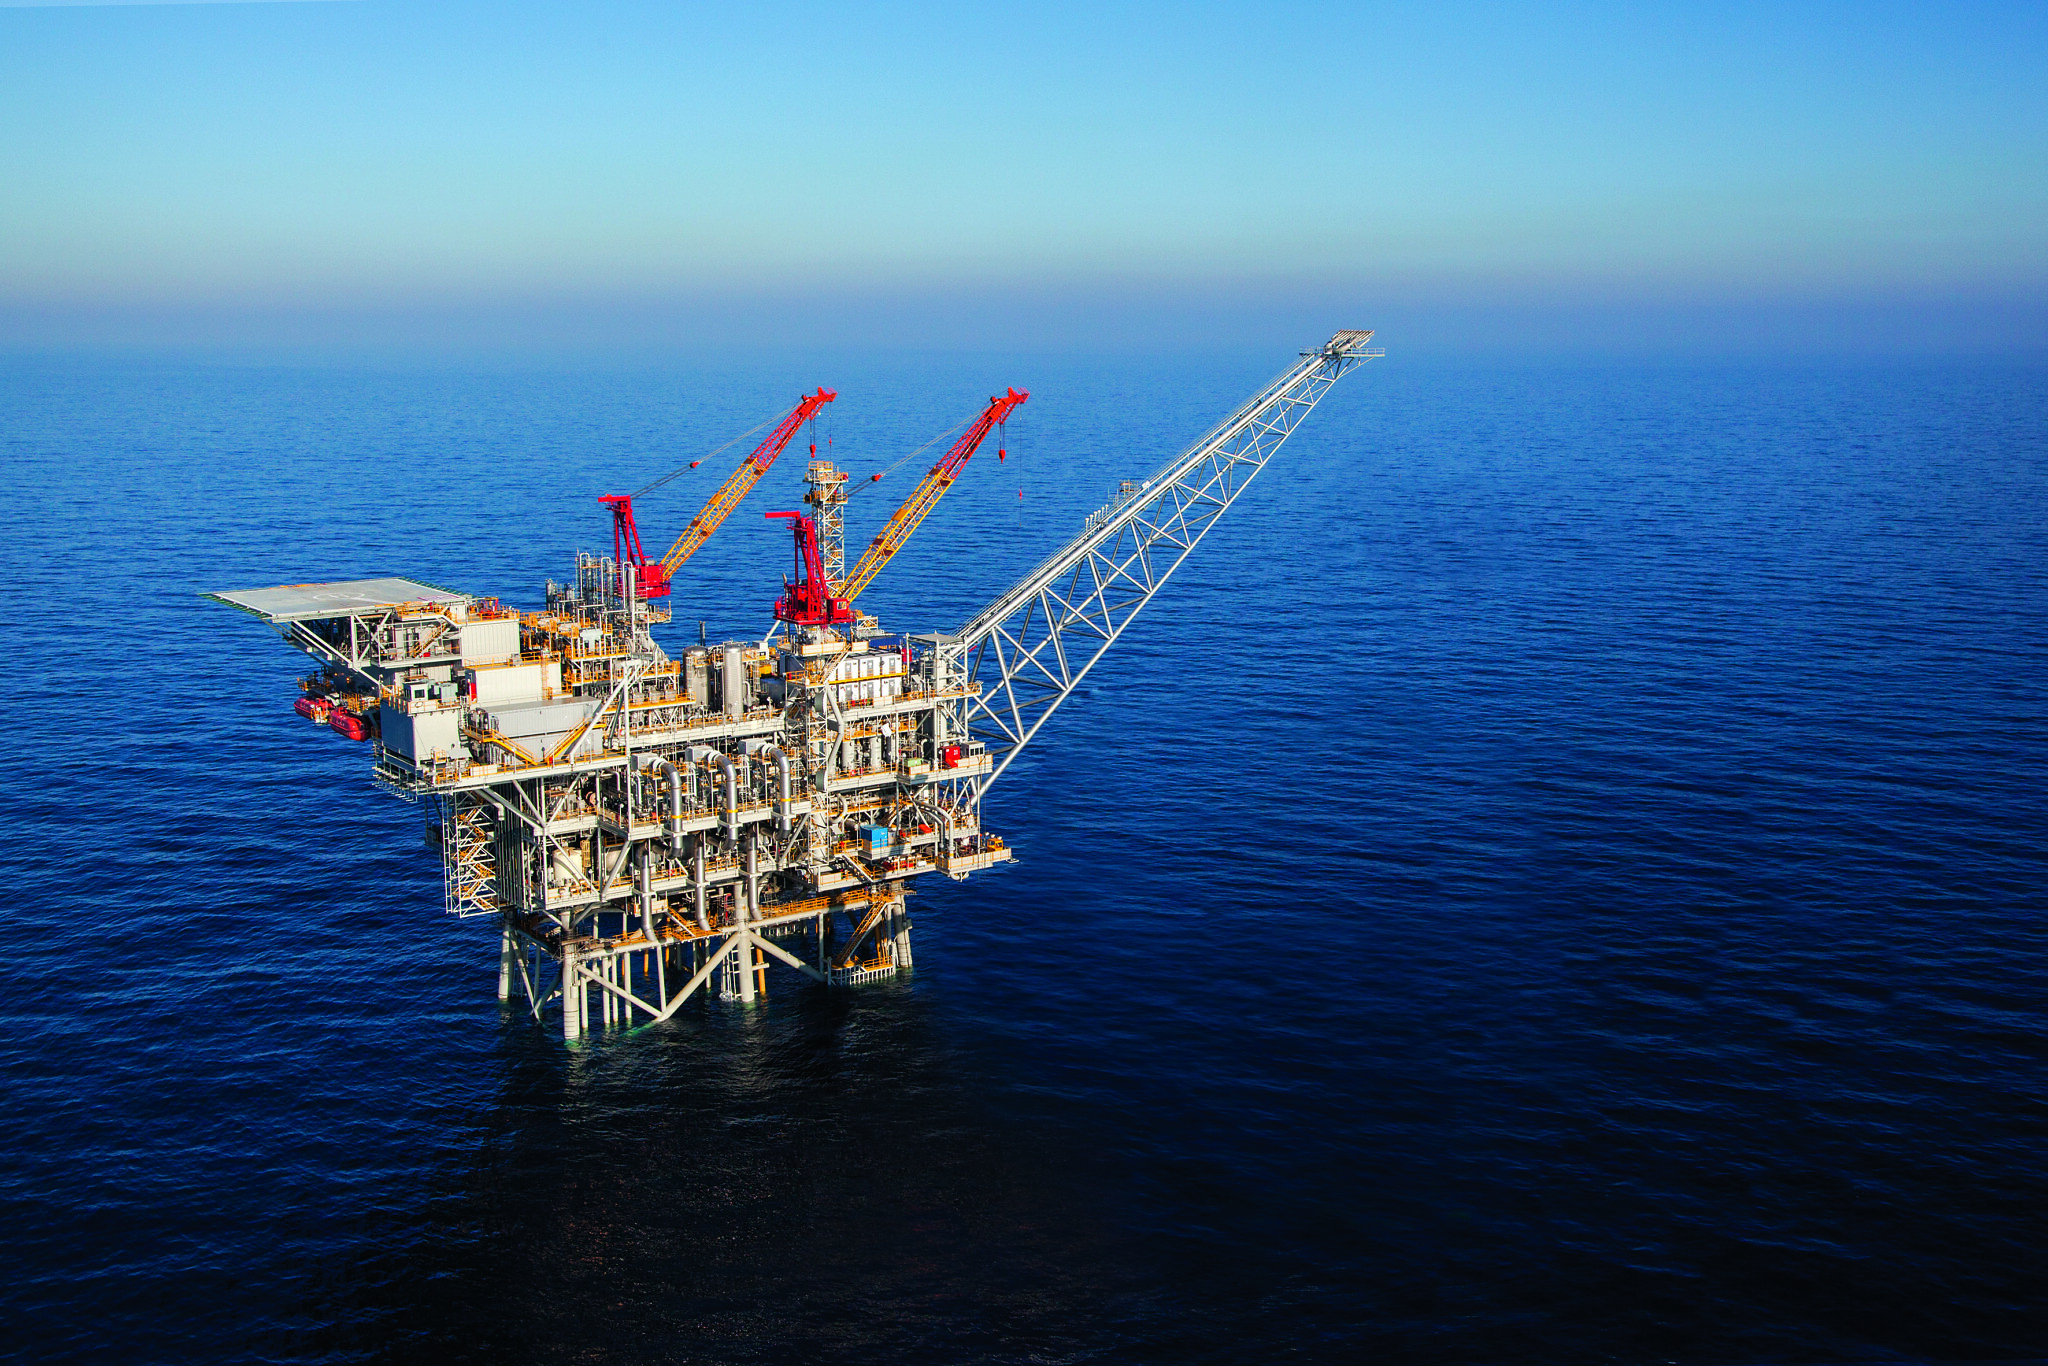 Chevron partners greenlight $24m investment to boost gas production at offshore site